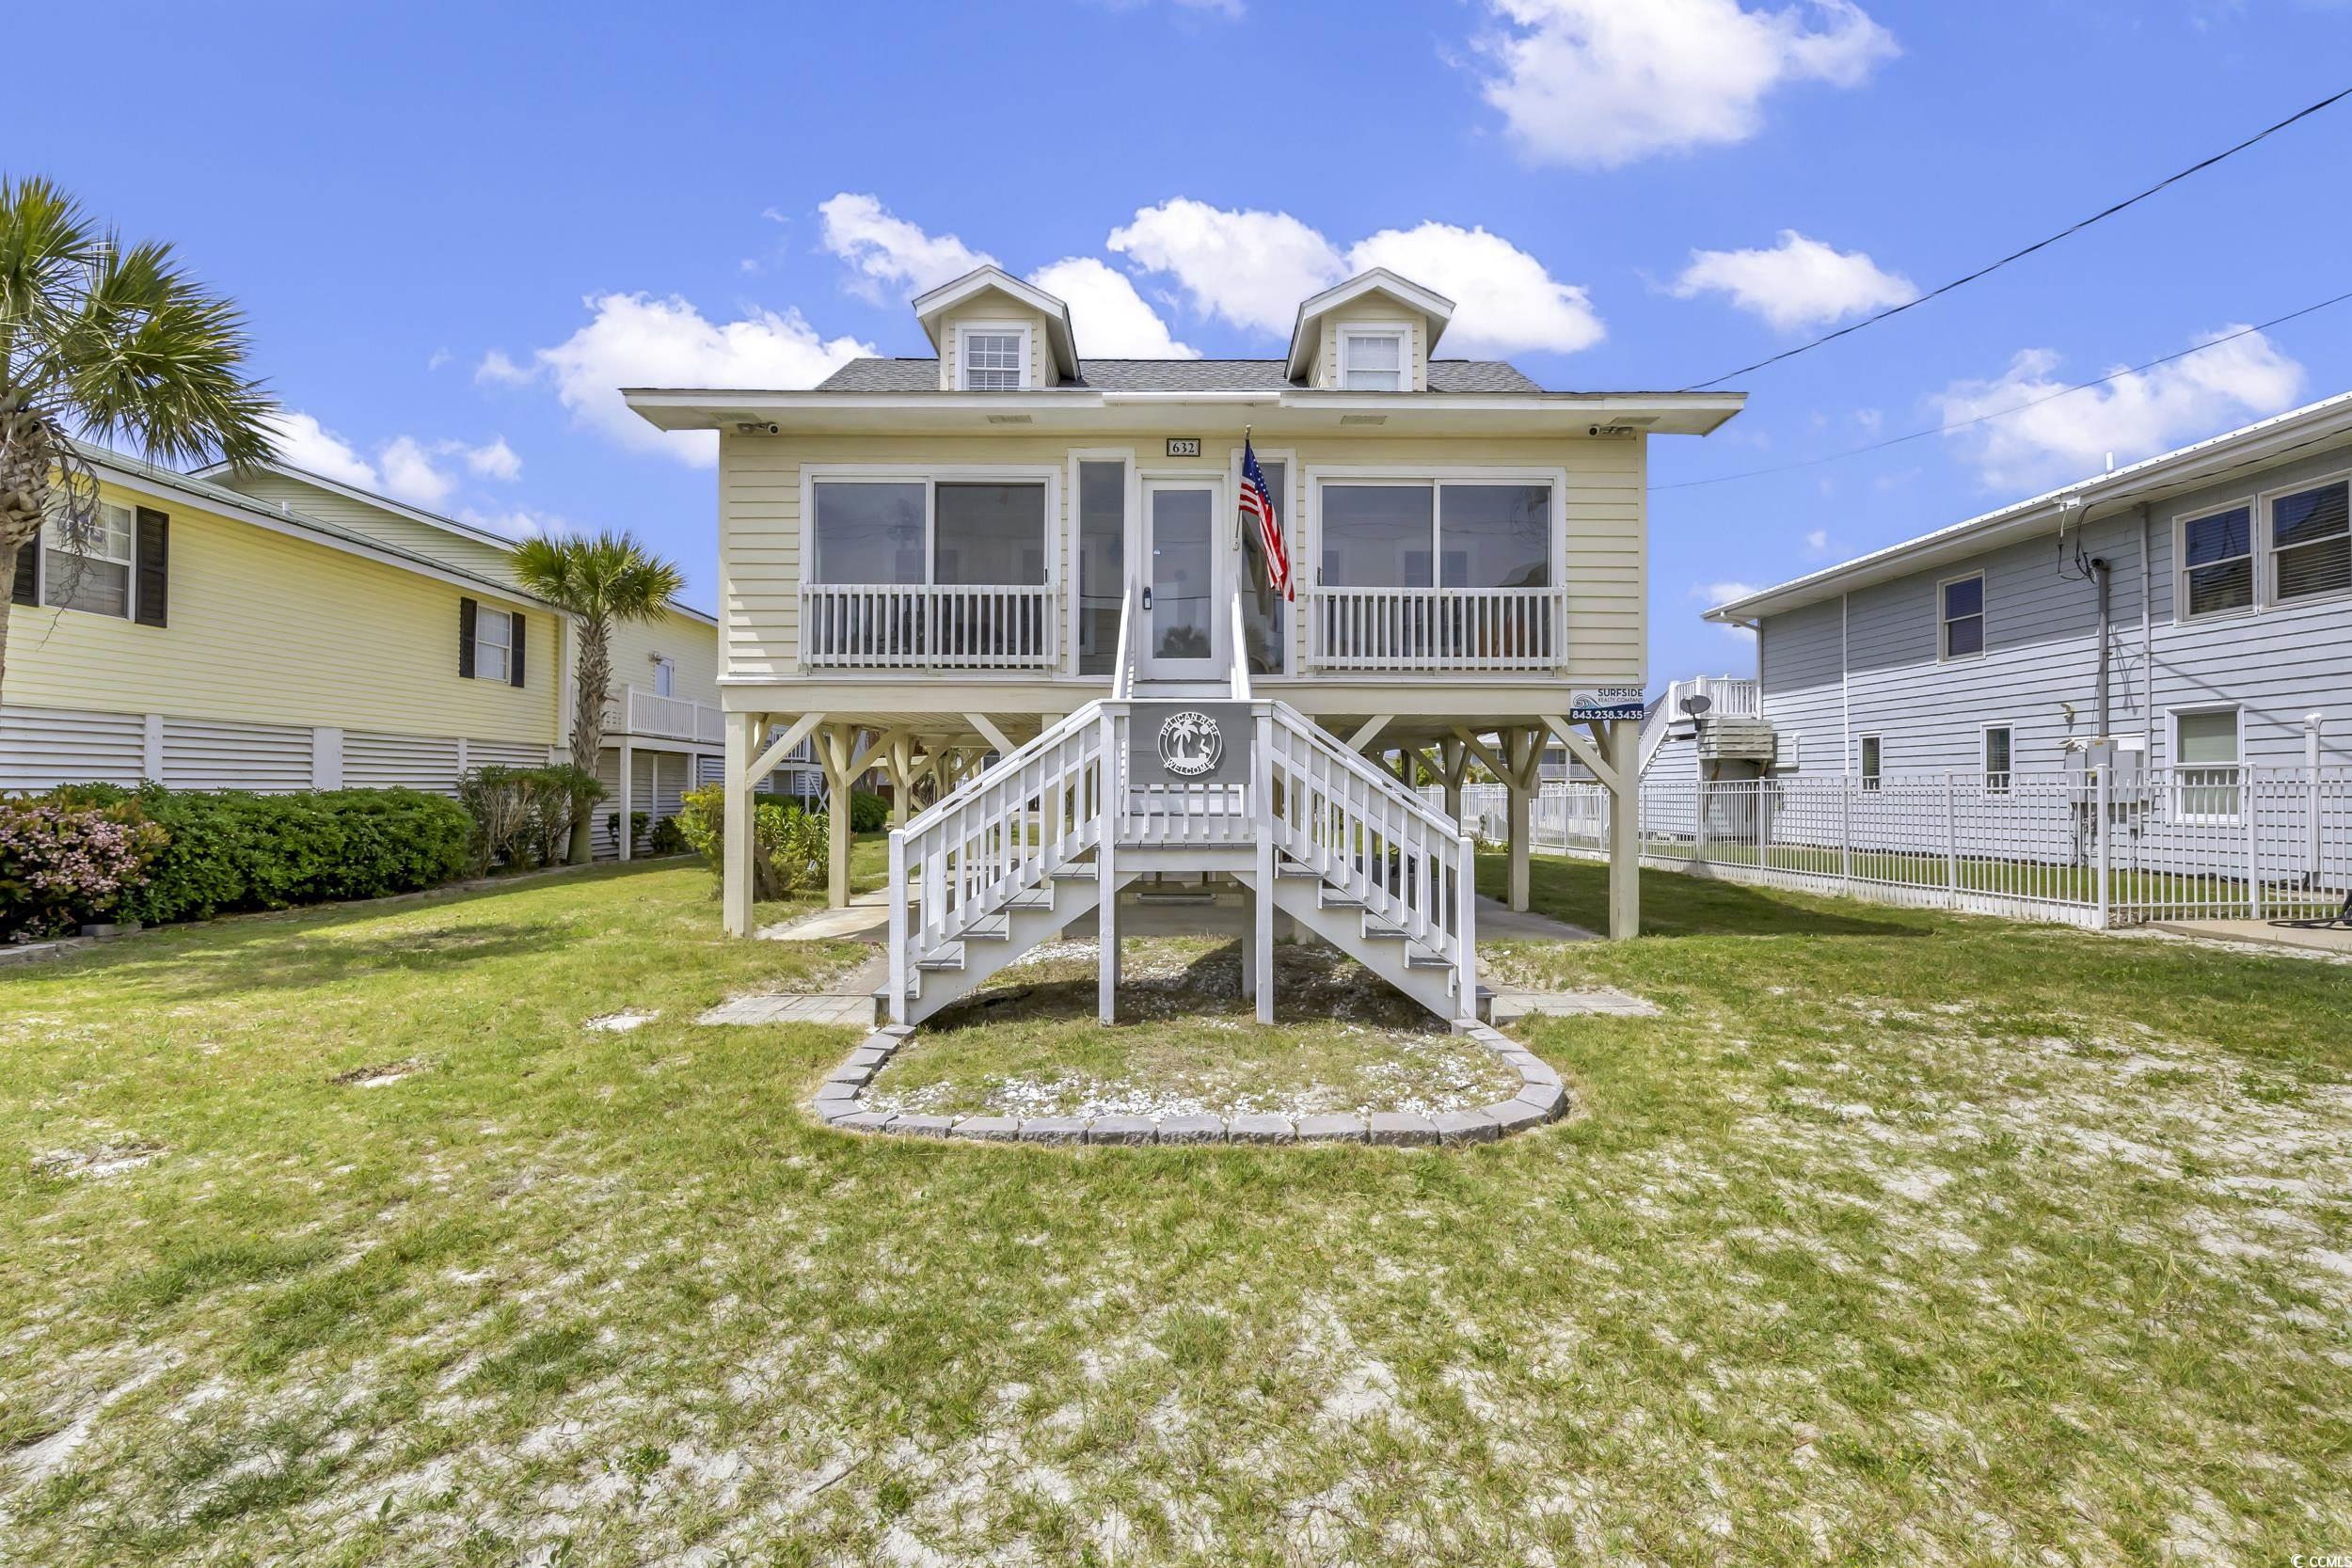 632 South Waccamaw Dr., Murrells Inlet, SC 29576